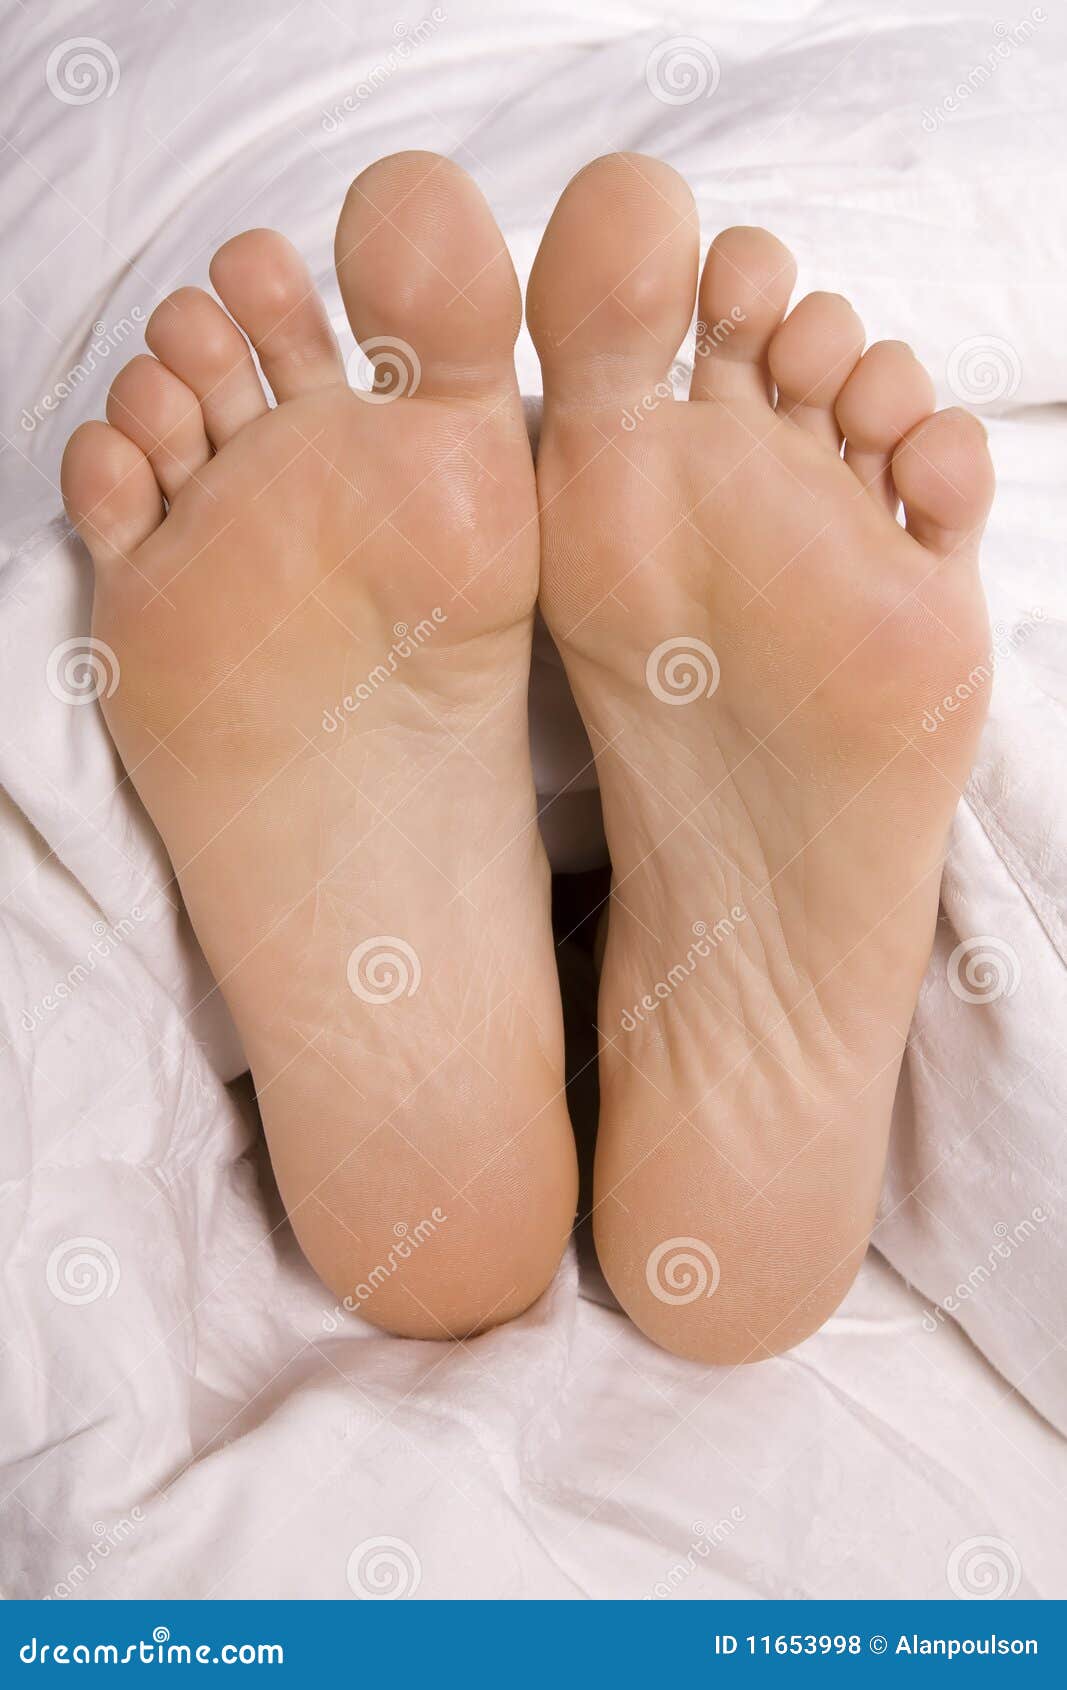 Perfect Female Feet With Smooth Skin Isolated On White Stock Photo -  Download Image Now - iStock